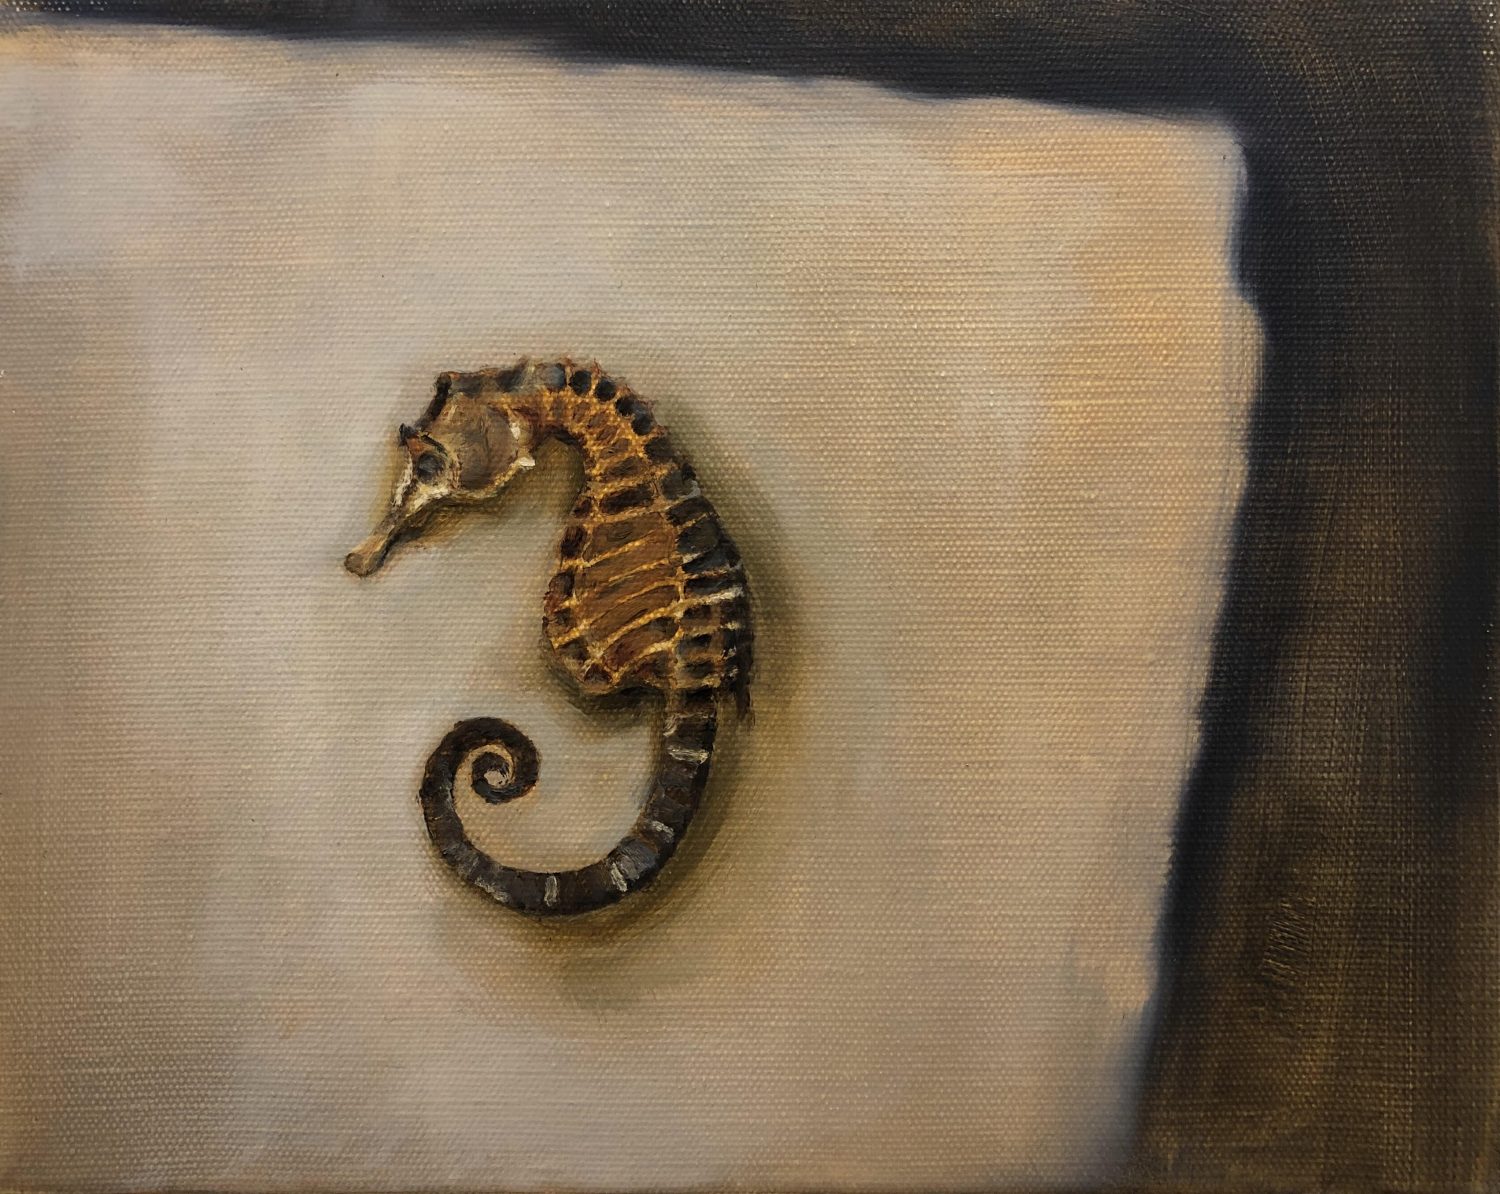 Seahorse by Beatrice O'Connell